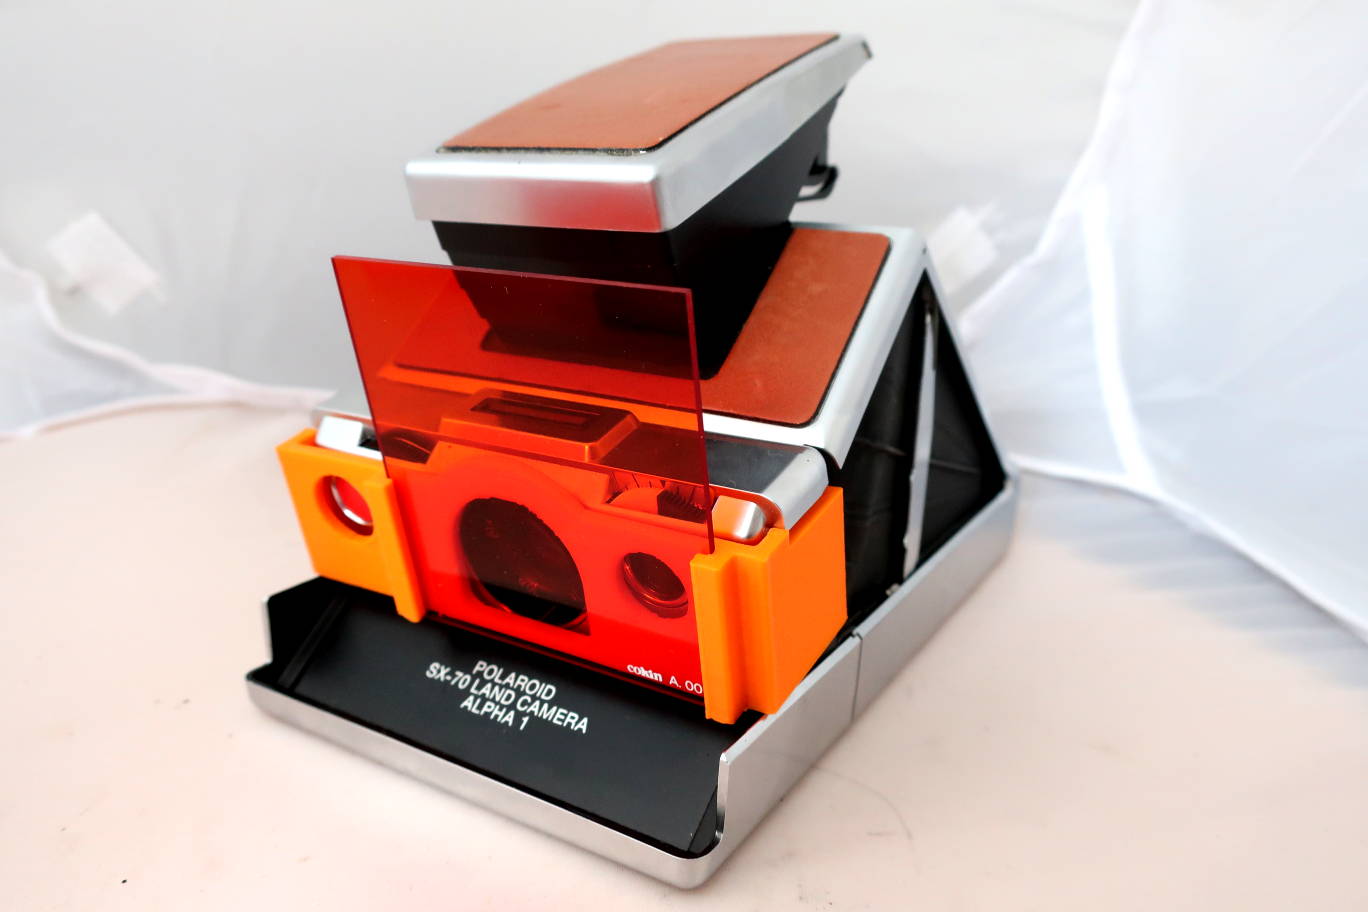 F106 Filter Holder & Shade Polaroid SX-70 Special Effects Filter Set F101-F105 